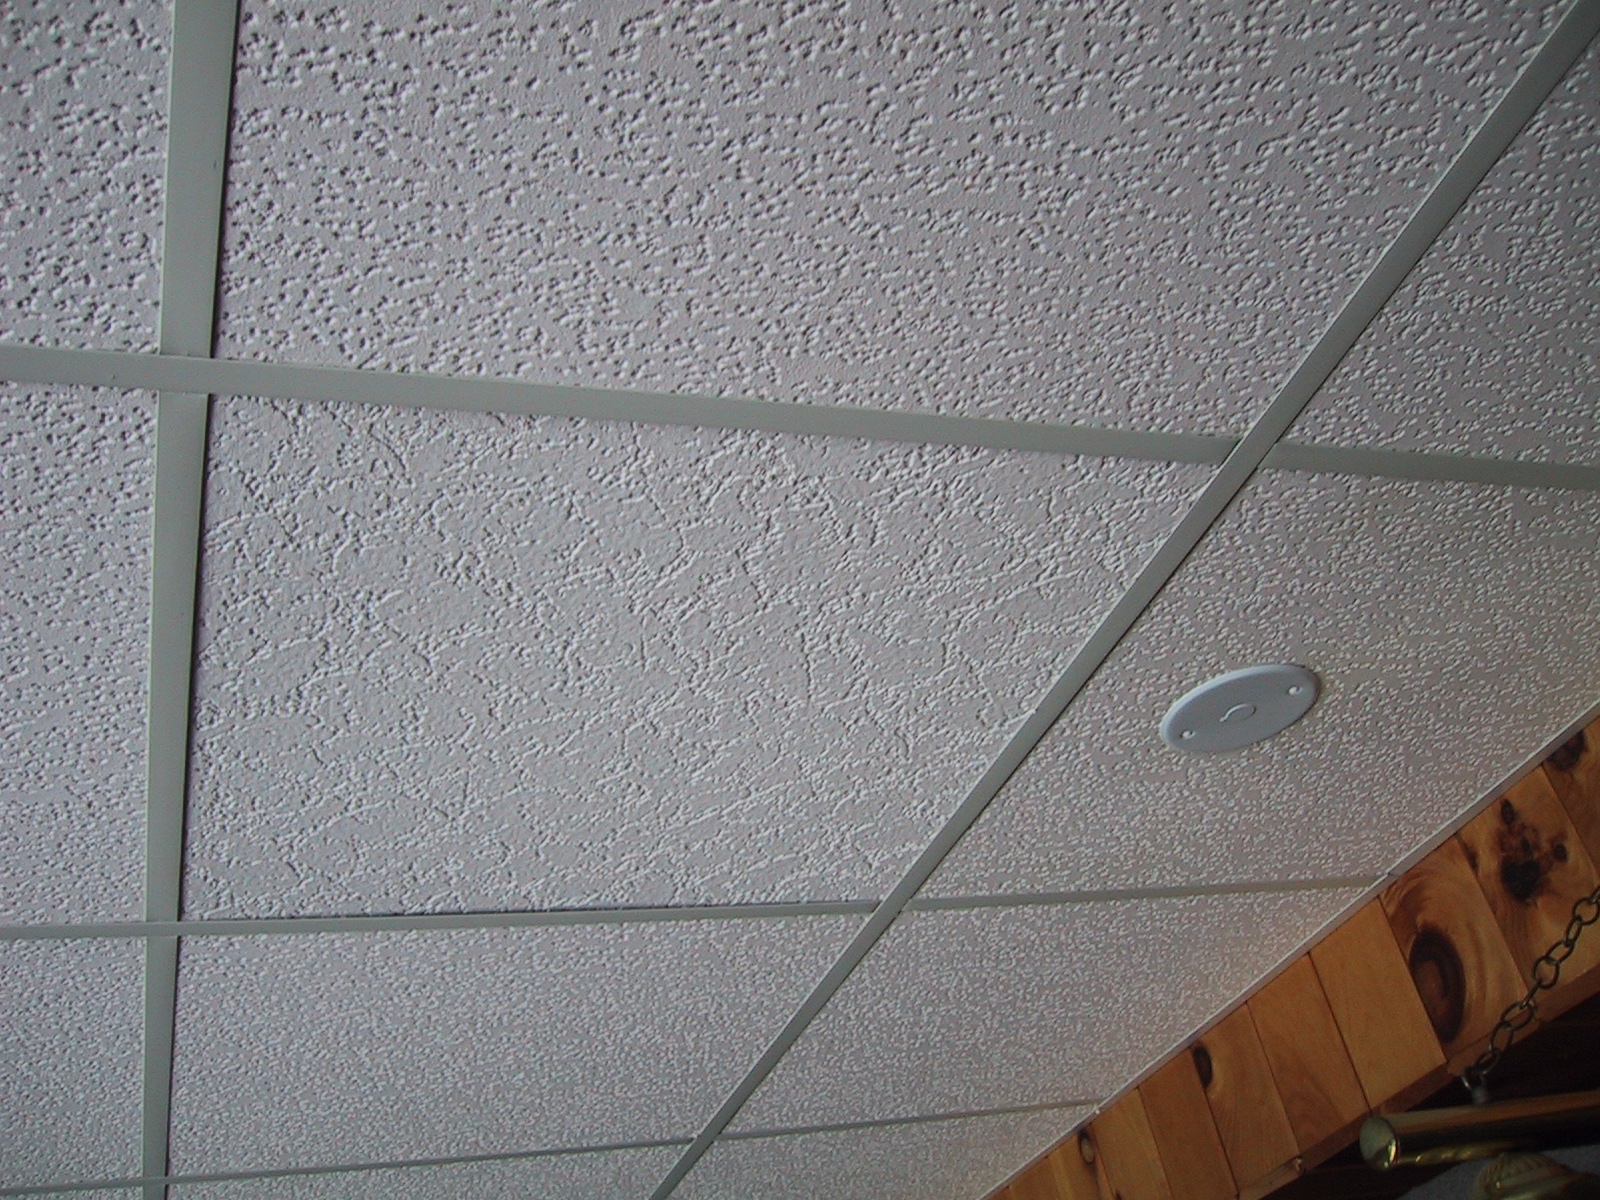 Sound Insulating Drop Ceiling Tiles Sound Insulating Drop Ceiling Tiles sound reducing ceiling tiles commercial soundproofing ceiling 1600 X 1200